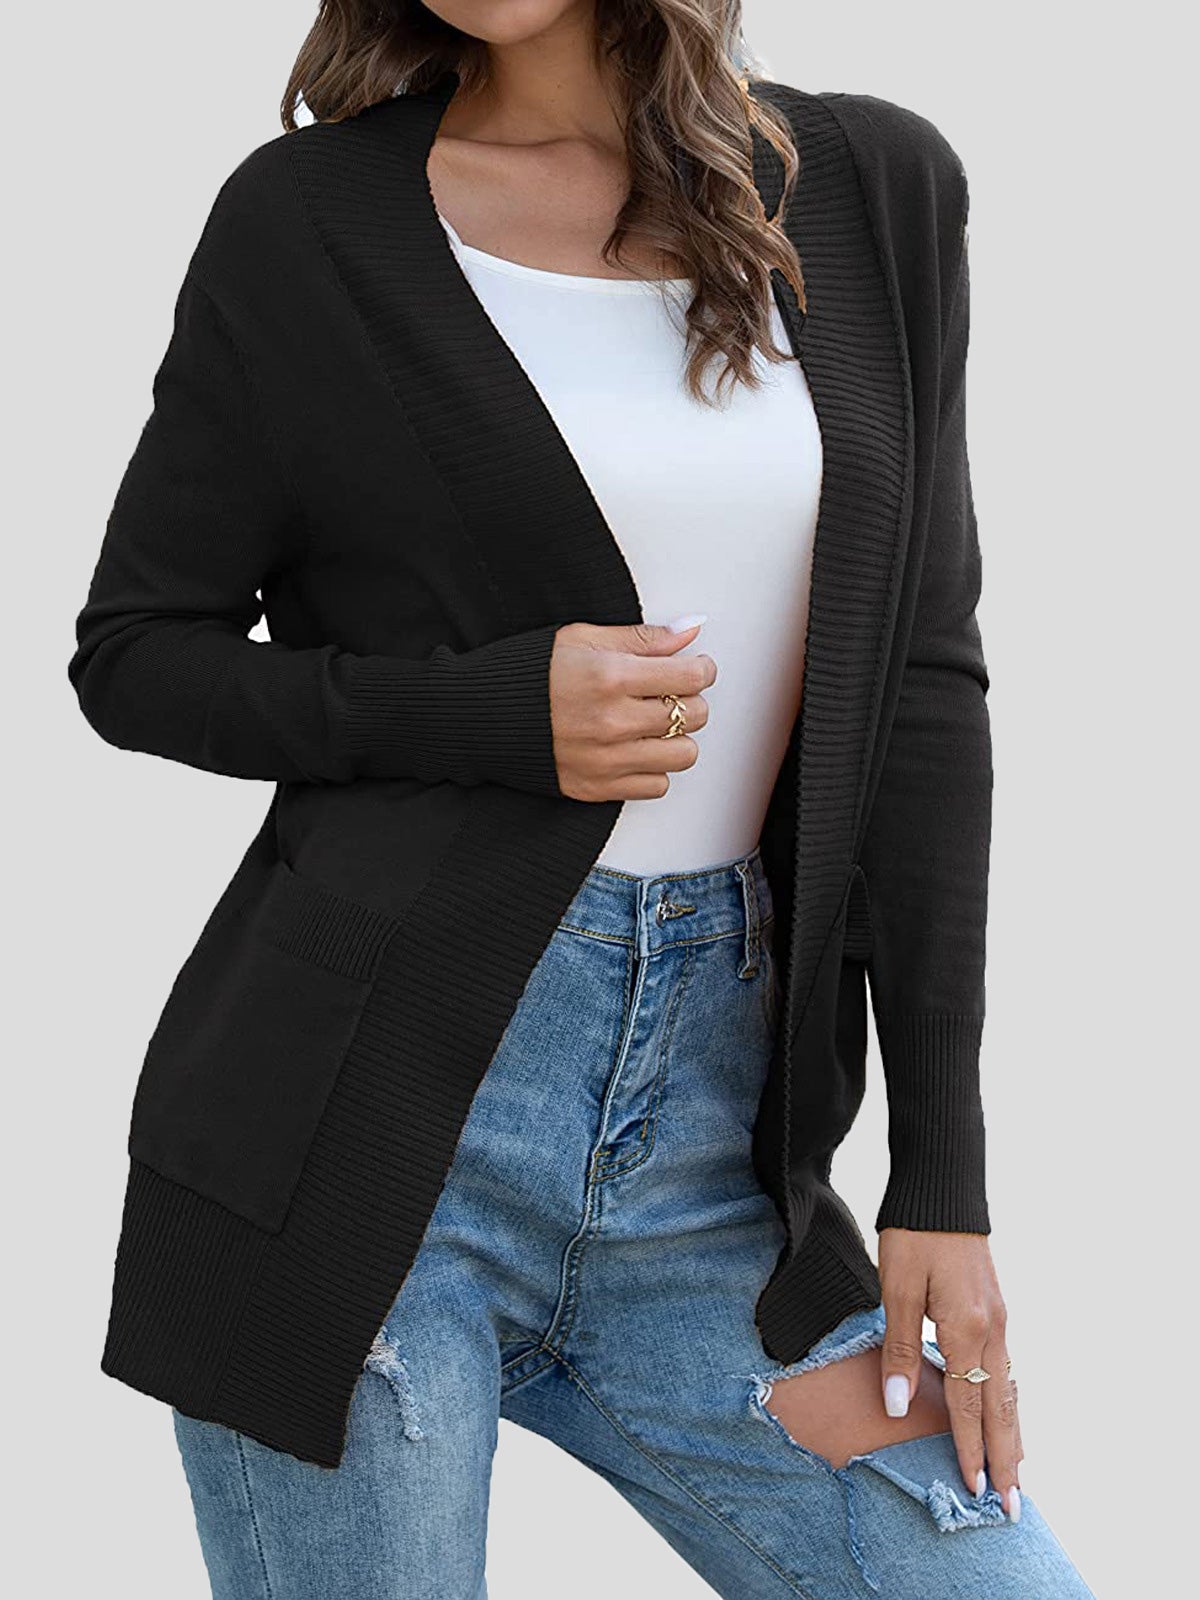 Women's Cardigans Solid Pocket Knitted Sweater Cardigan - Cardigans & Sweaters - Instastyled | Online Fashion Free Shipping Clothing, Dresses, Tops, Shoes - 20-30 - 31/12/2021 - CAR2112311208